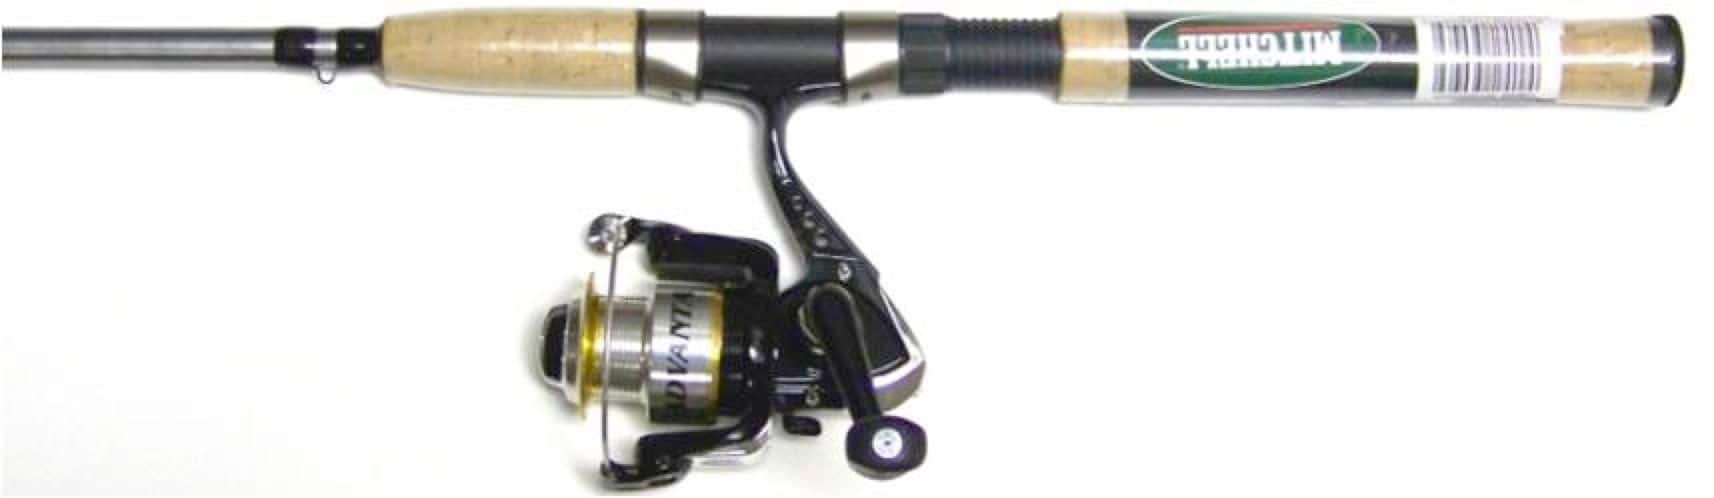 Mitchell Adventure II Tele Spinning Combo, Fishing Rod and Reel Combo,  Spinning Combos, Pre-spooled with mono line, Predator Fishing